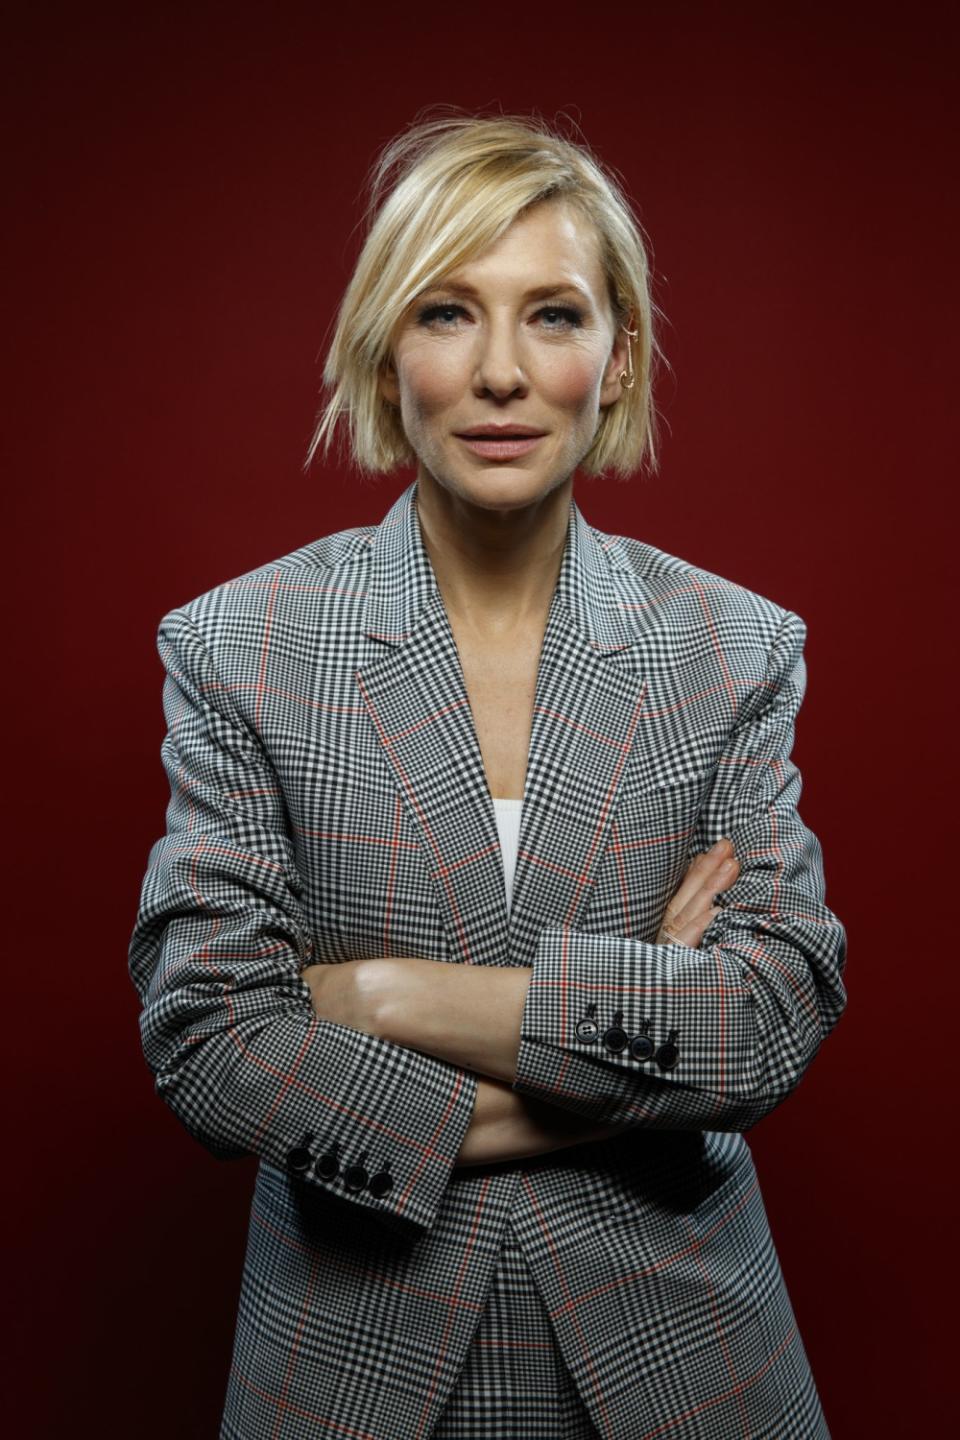 Cate Blanchett, from the film "Thor: Ragnarok," photographed in the L.A. Times photo studio at Comic-Con 2017.